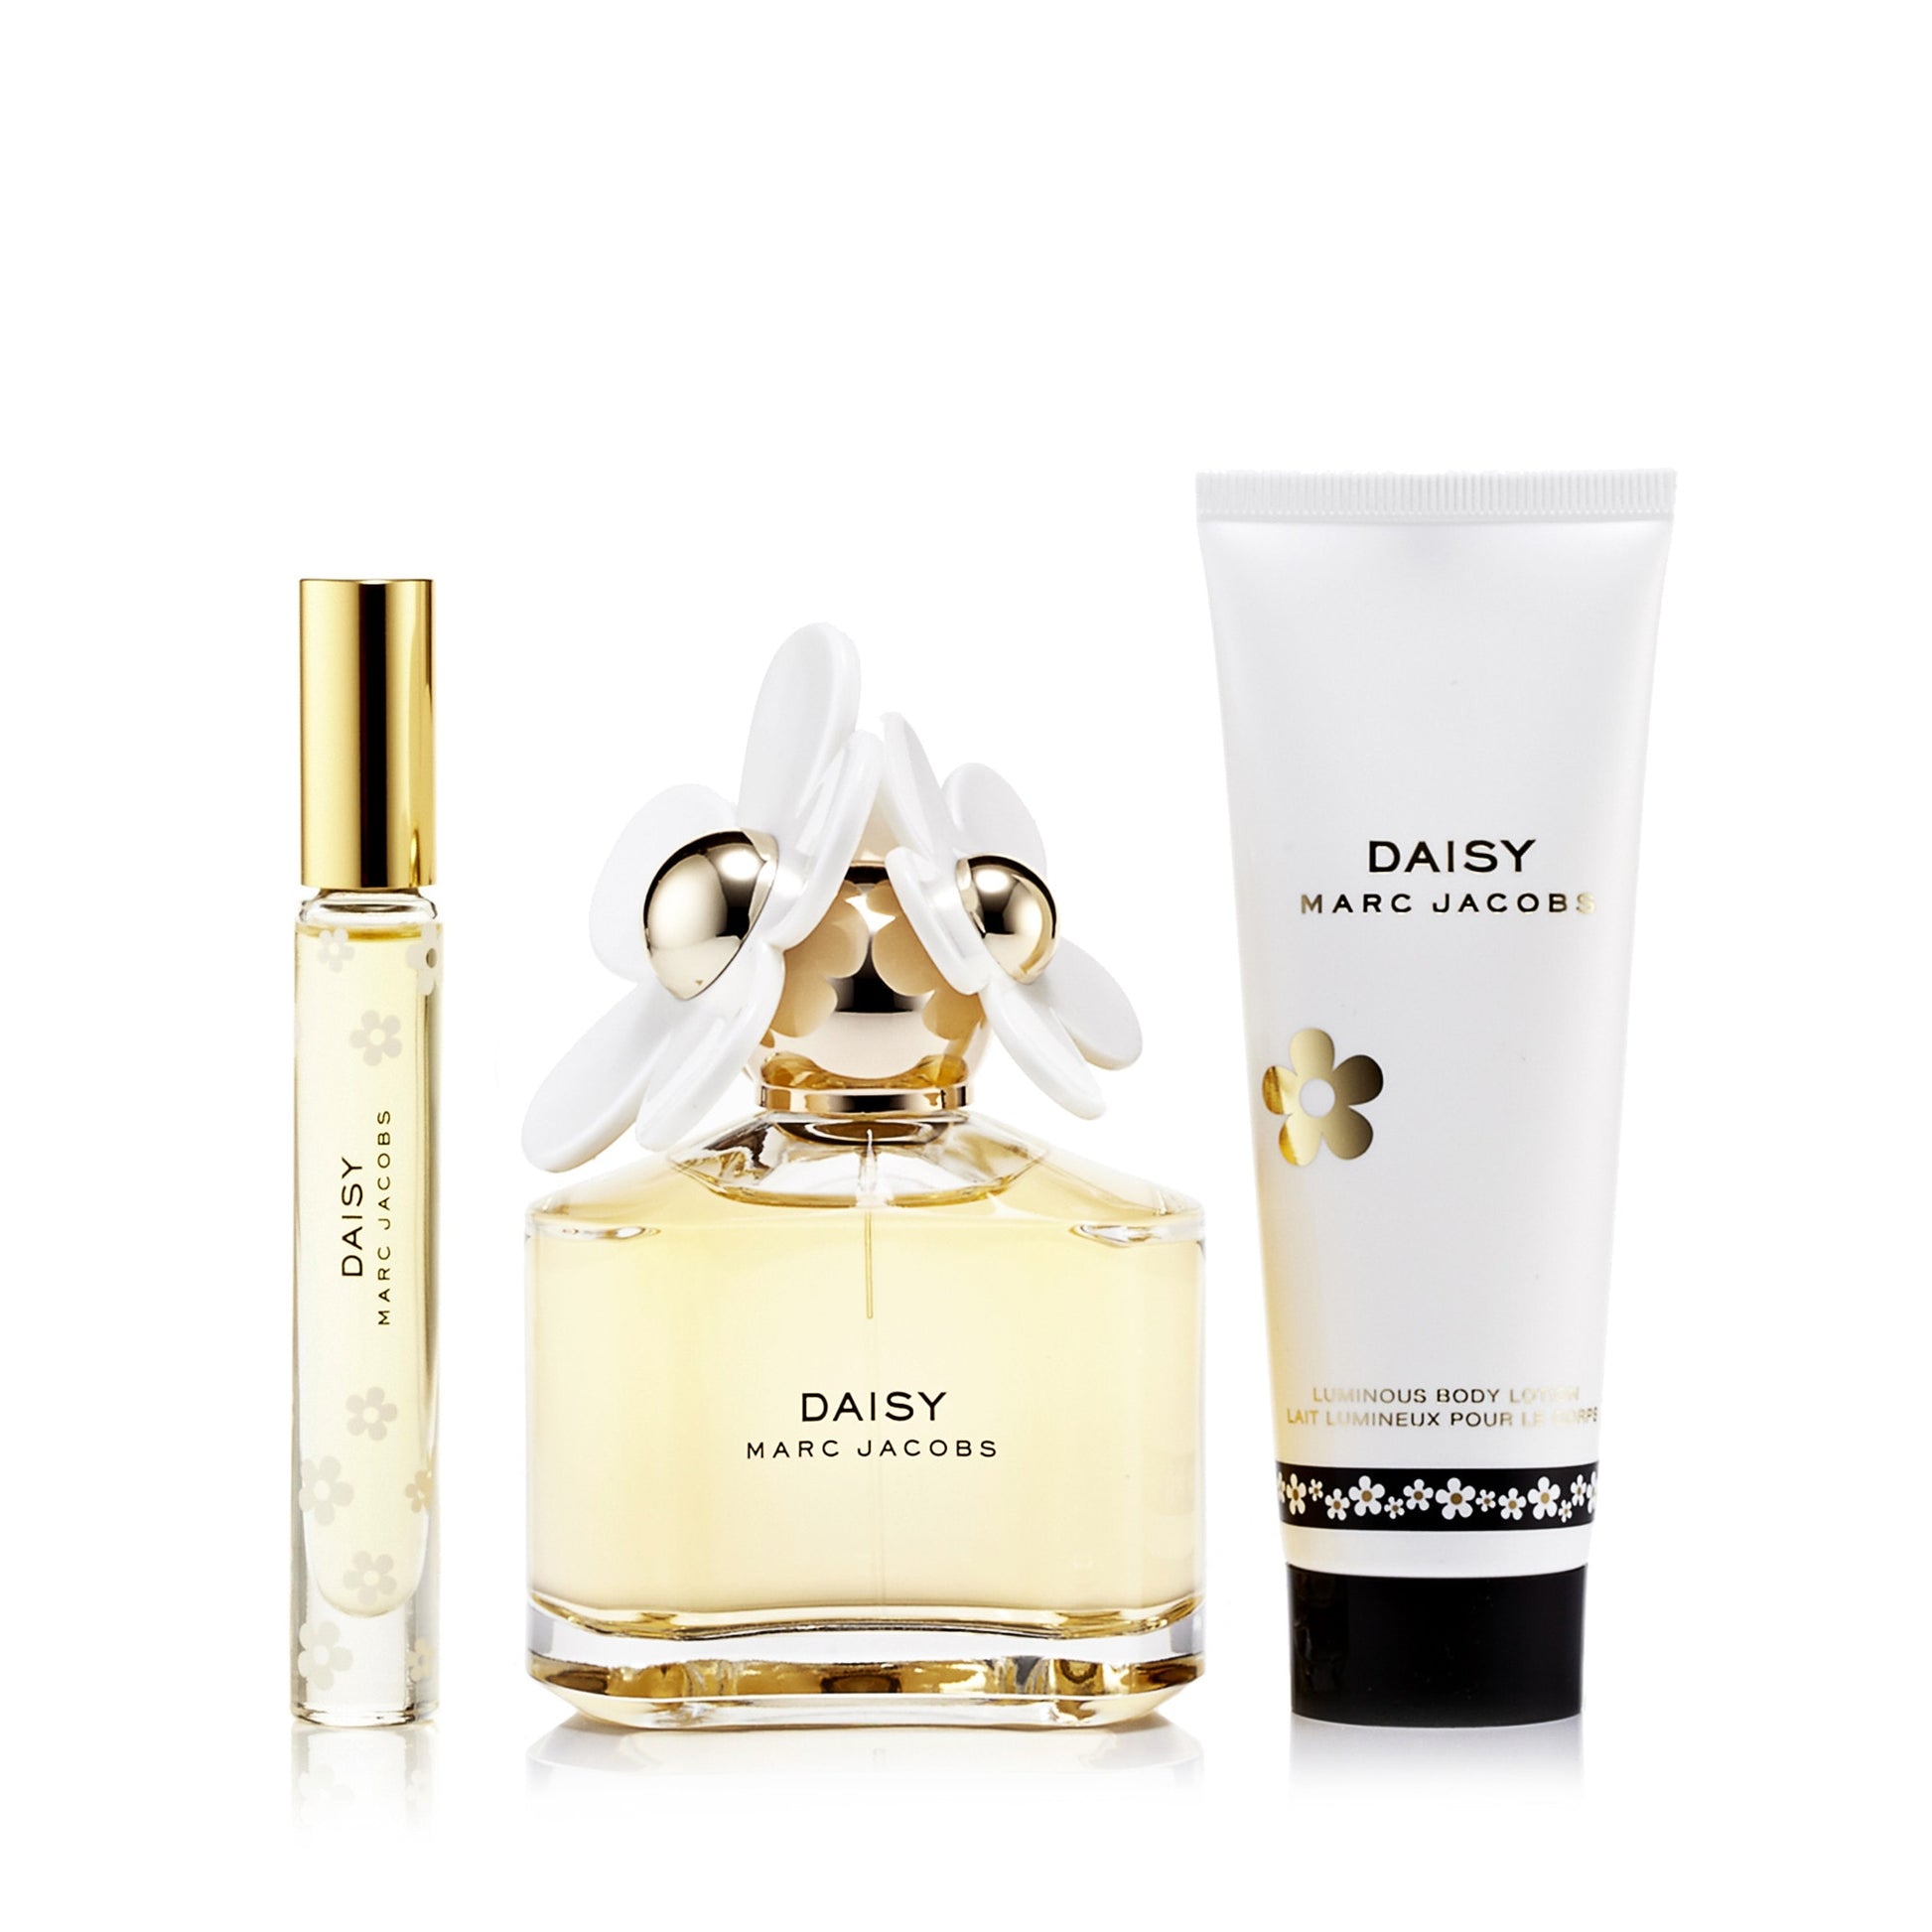 Daisy Gift Set Eau de Toilette, Body Lotion, Rollerball for Women by Marc Jacobs, Product image 1